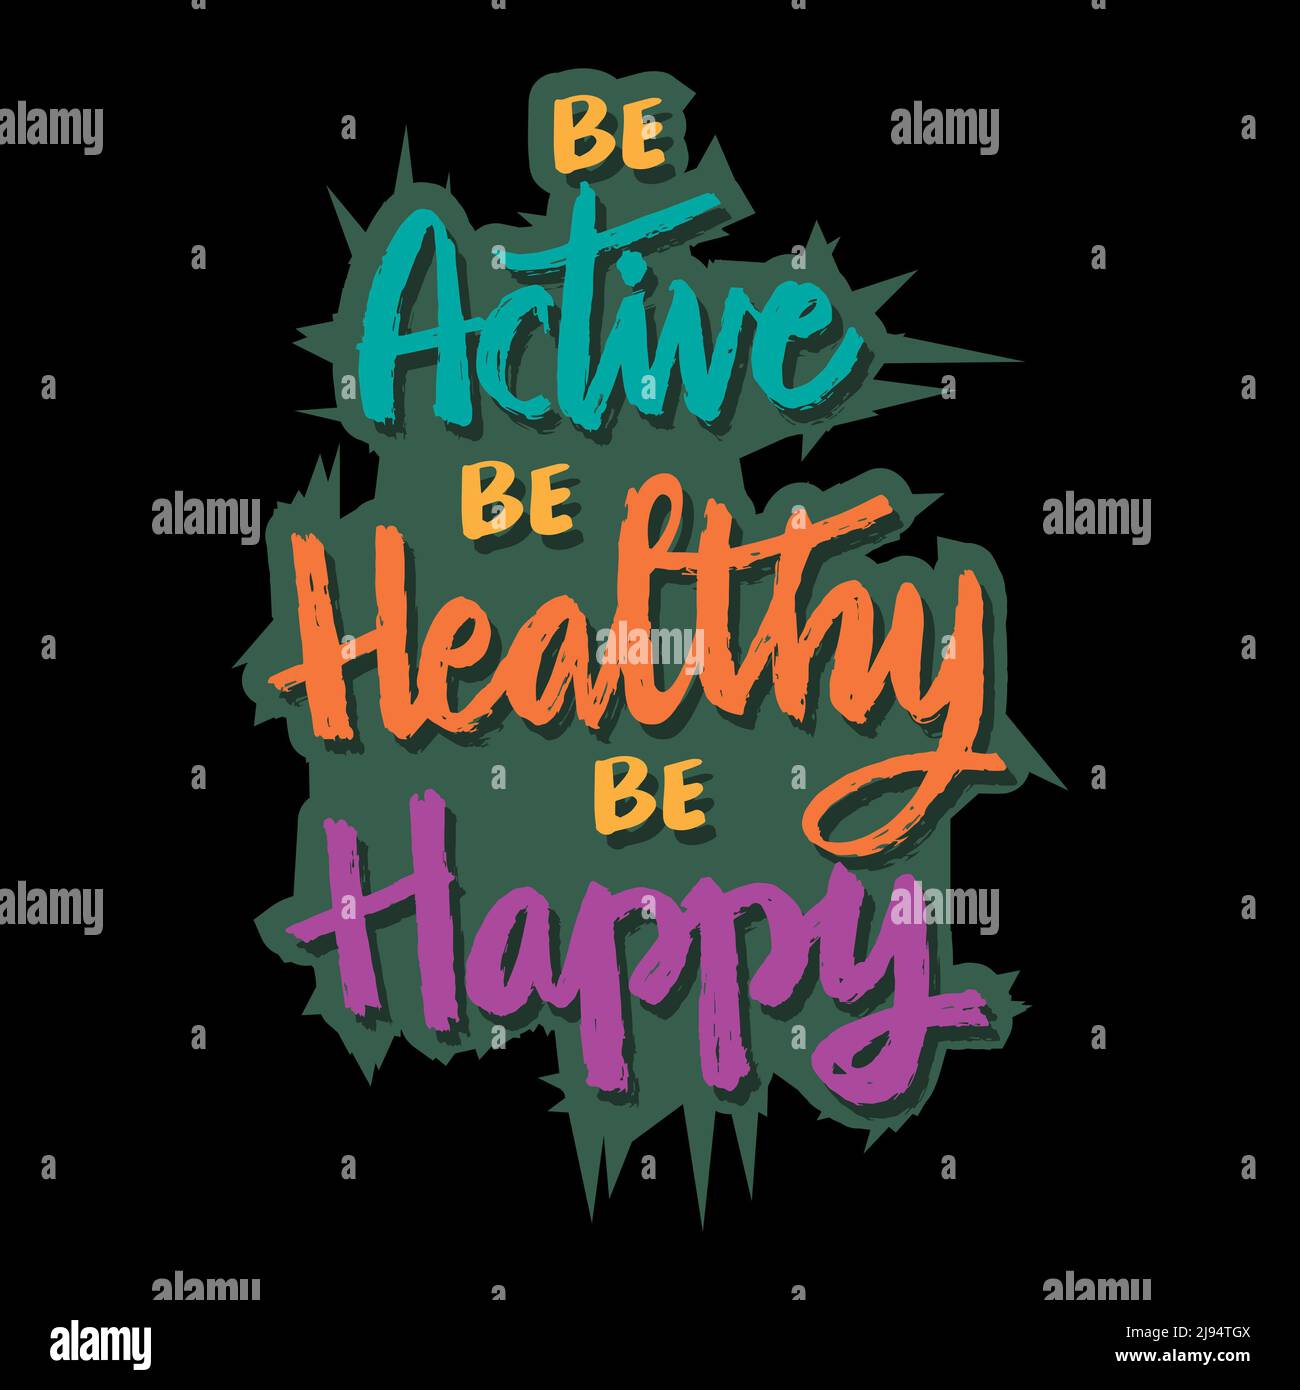 Be active, be healthy, be happy. Poster quotes. Stock Photo